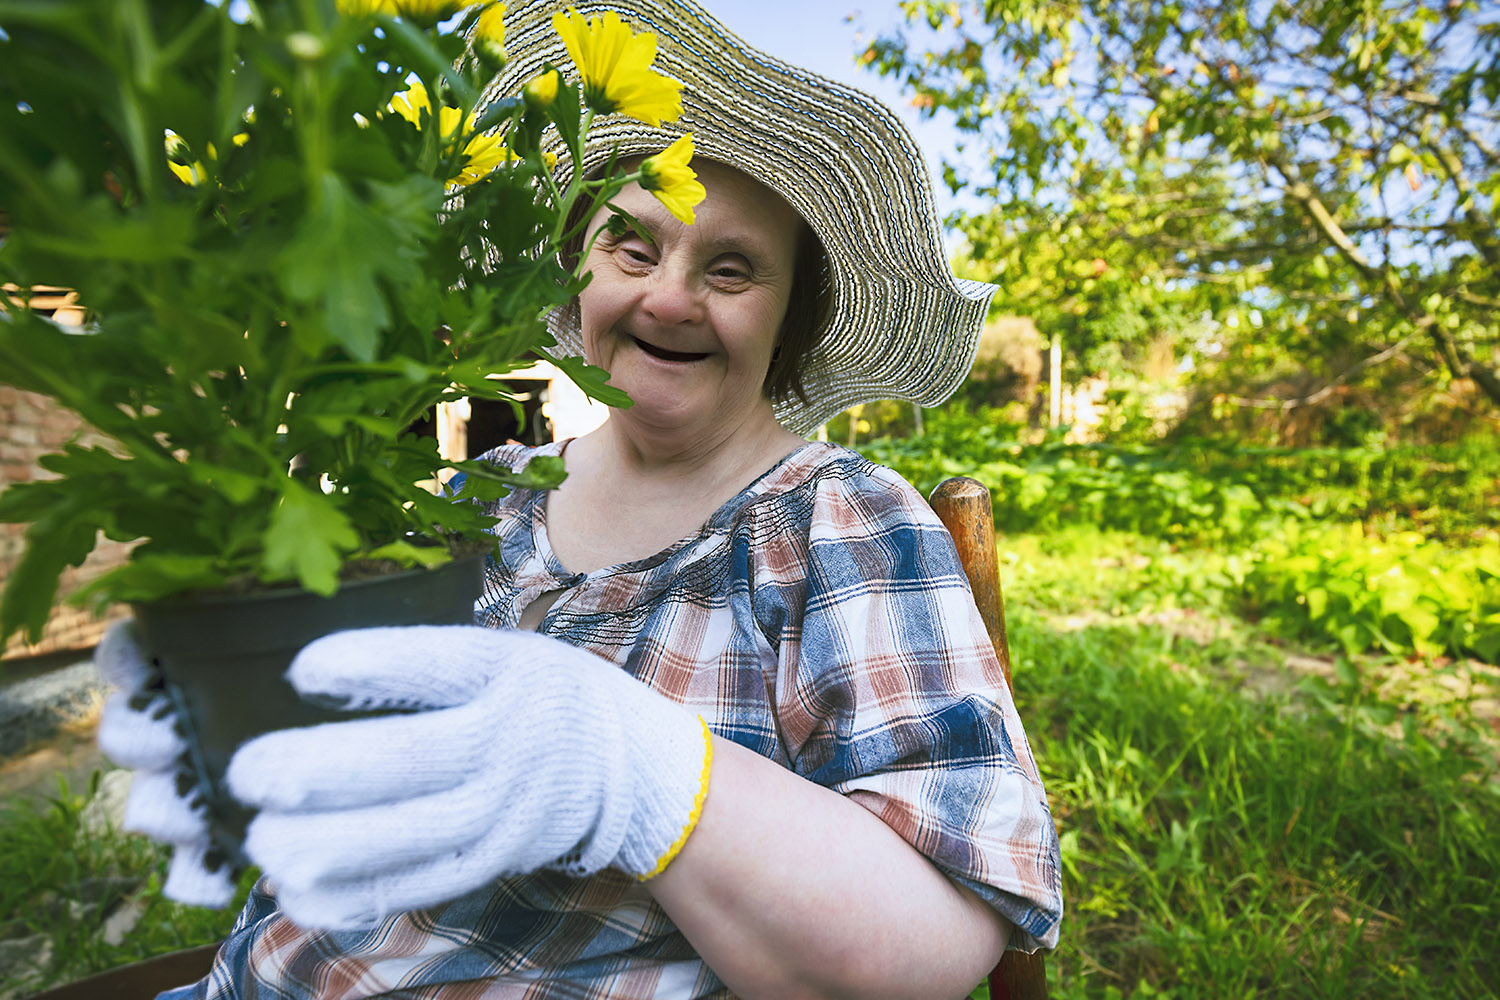 A woman living with down syndrome is working in the garden and holding a pot with flowers